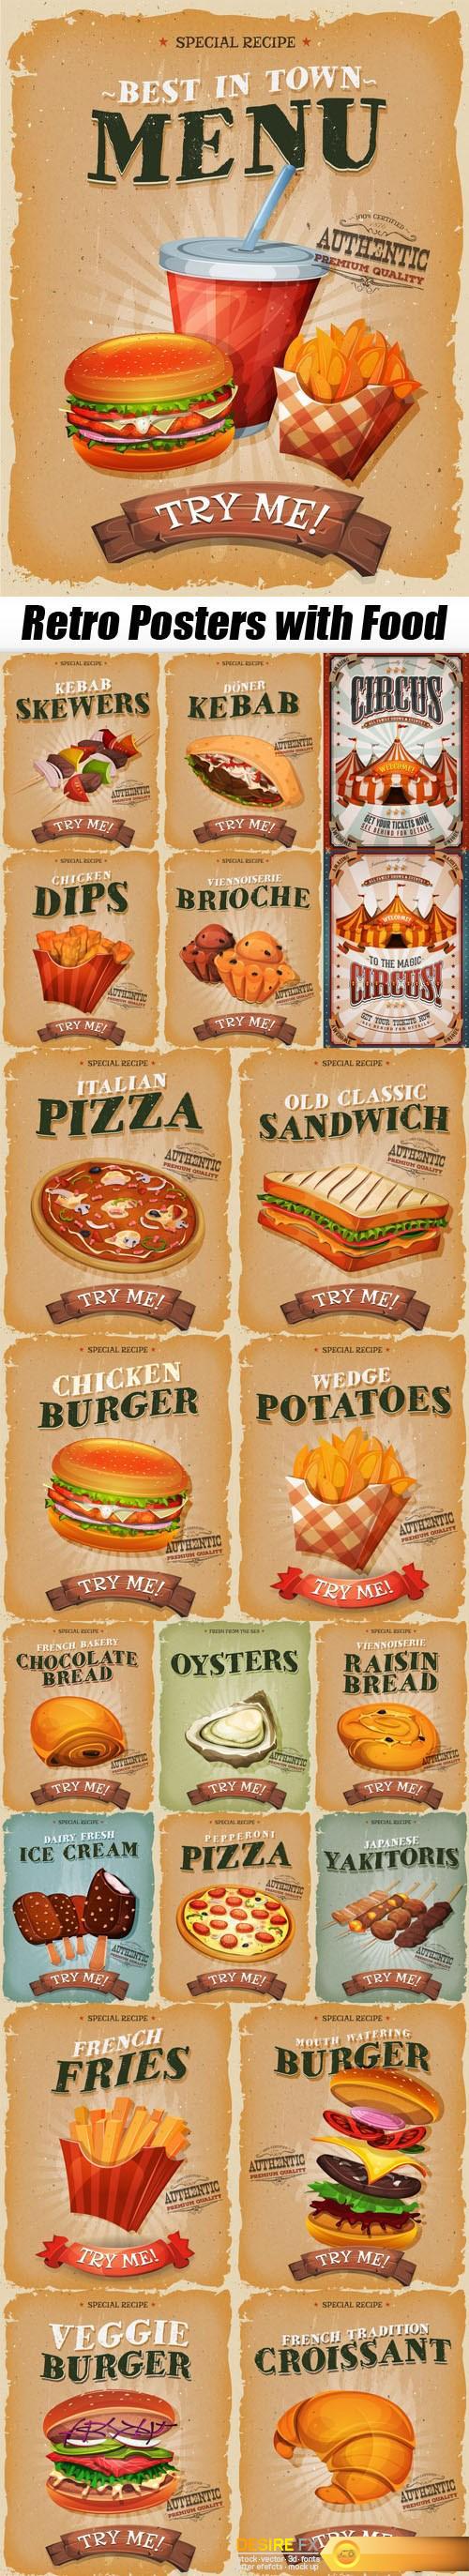 Retro Posters with Food 